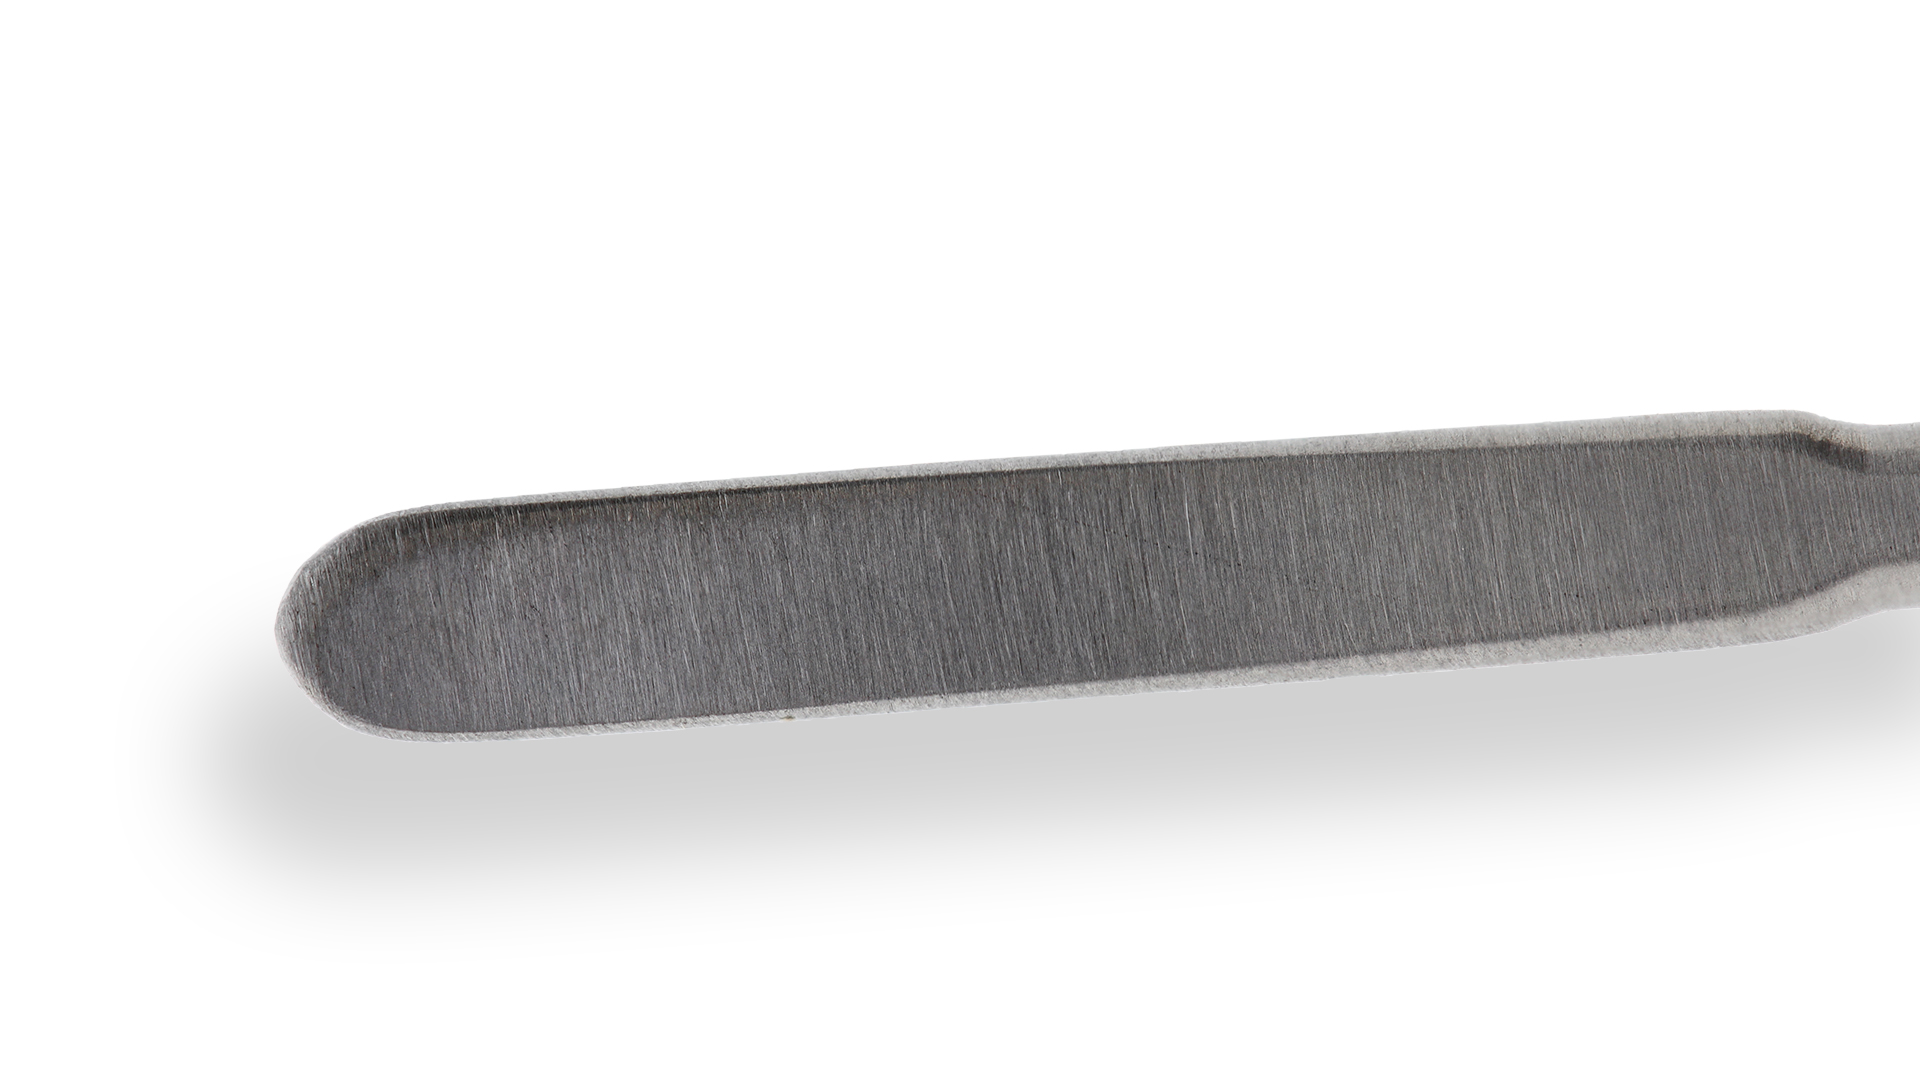 Penfield Dissector #4 - Slightly Curved 3mm Blunt Dissector